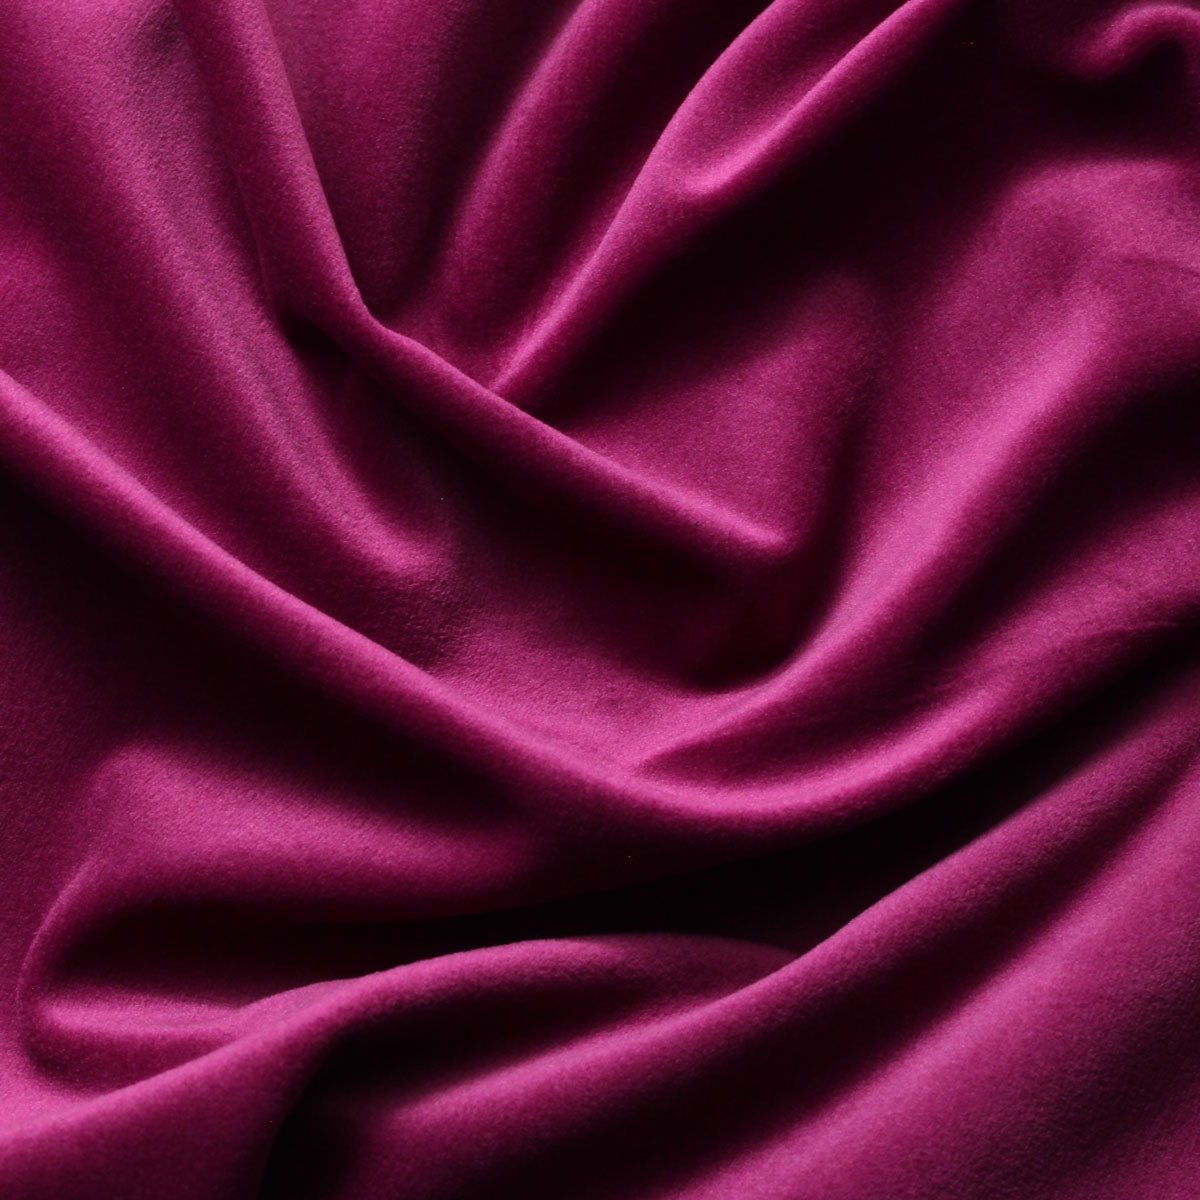 Fabric Mart Direct Hot Pink Fuchsia Cotton Velvet Fabric By The Yard, 54  inches or 137 cm width, 1 Yard Pink Velvet Fabric, Upholstery Weight  Curtain Fabric, Wholesale Fabric, Fashion Velvet Fabric 